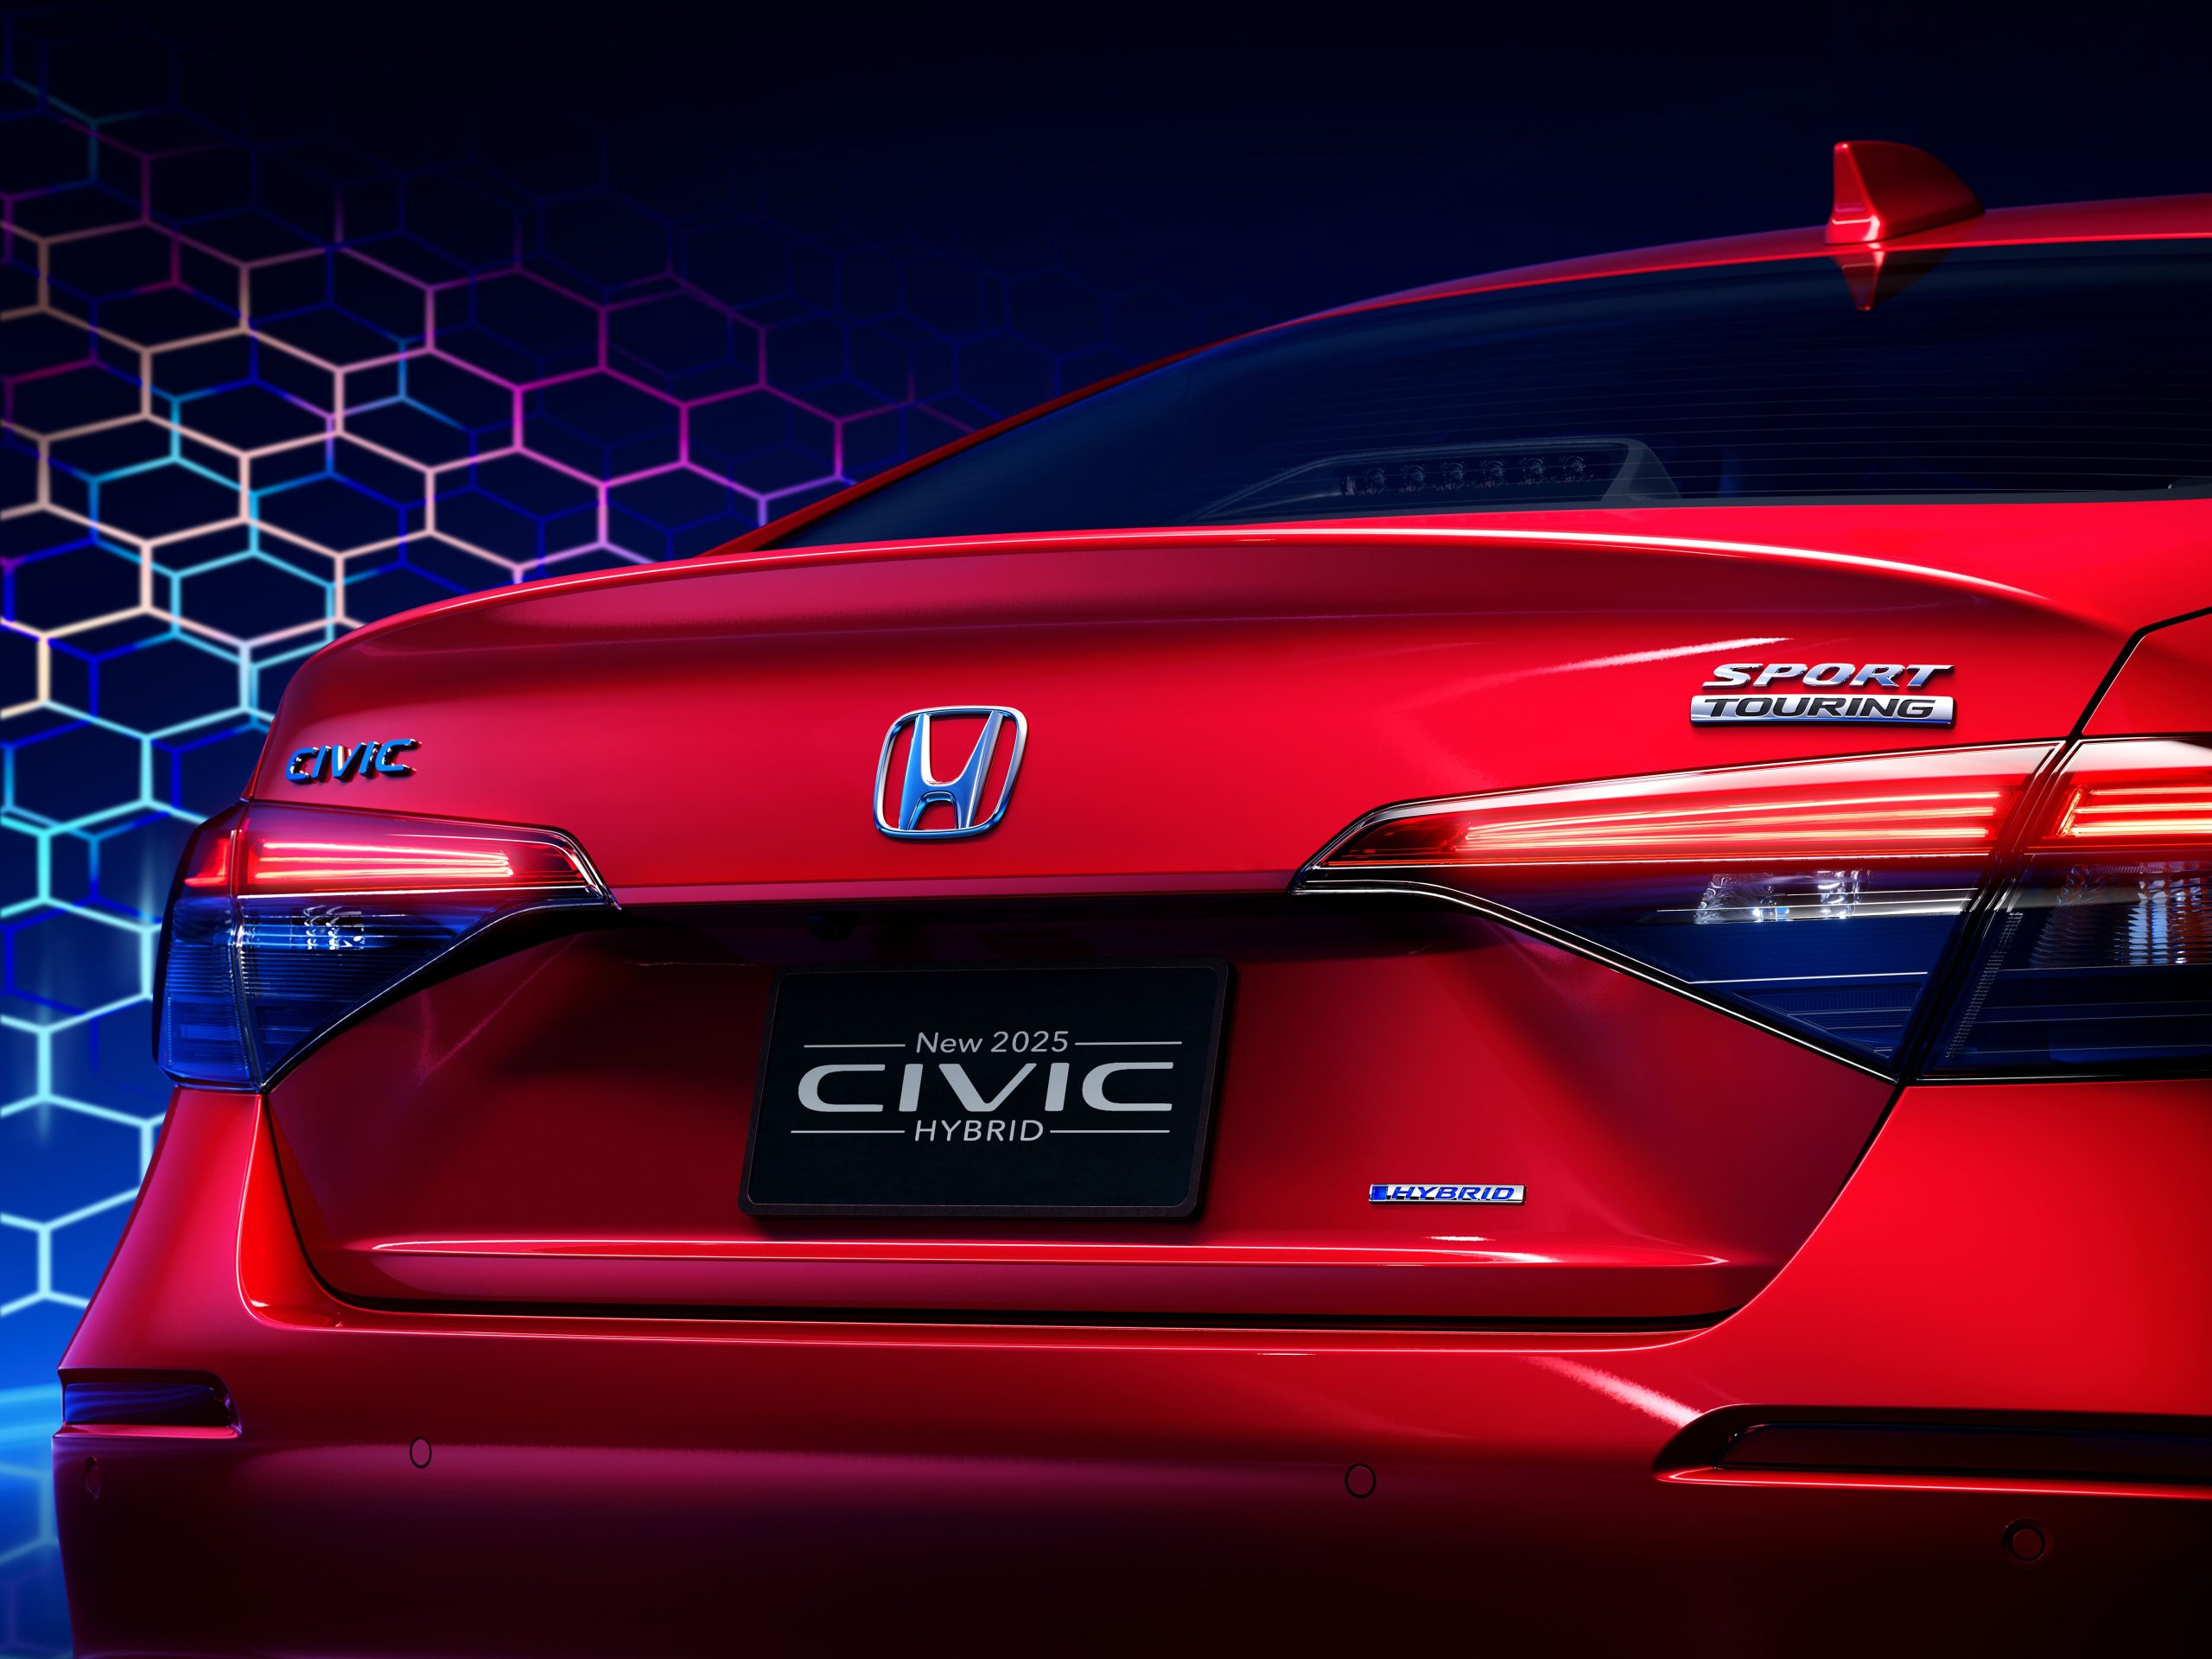 Latest Honda Civic Hybrid Debuts with Upgraded Design and Technology Features